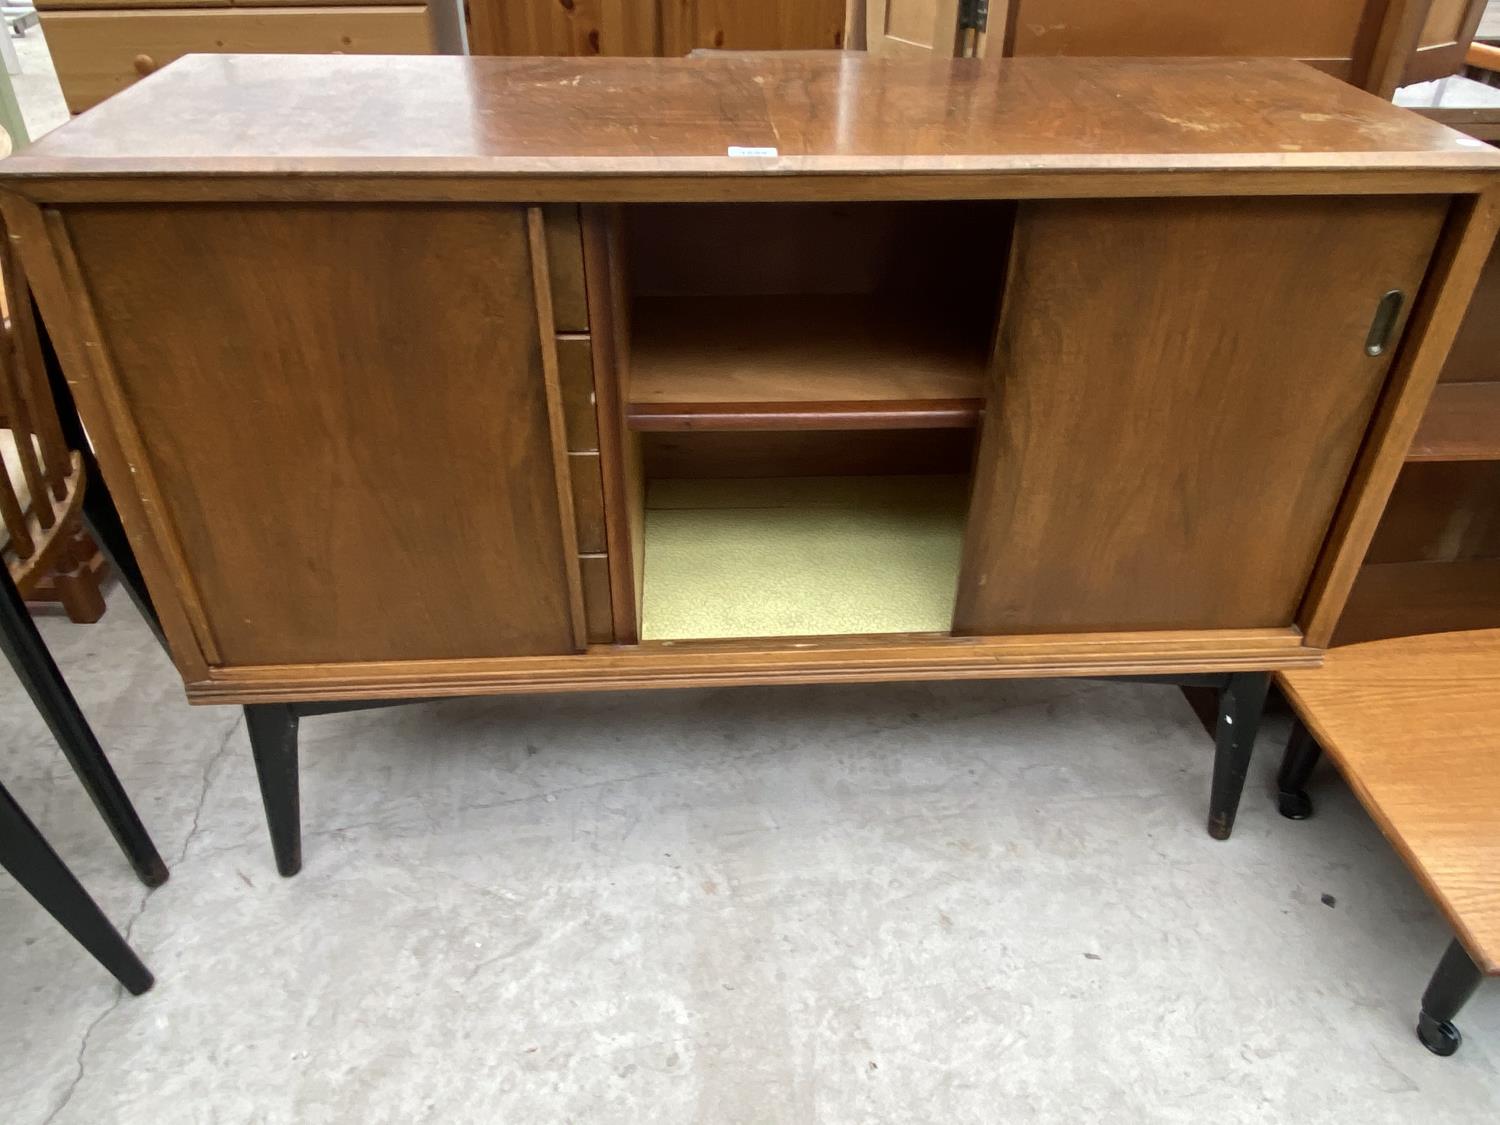 A RETRO WALNUT SIDEBOARD WITH TWO SLIDING DOORS AND FOUR DRAWERS - Image 5 of 5